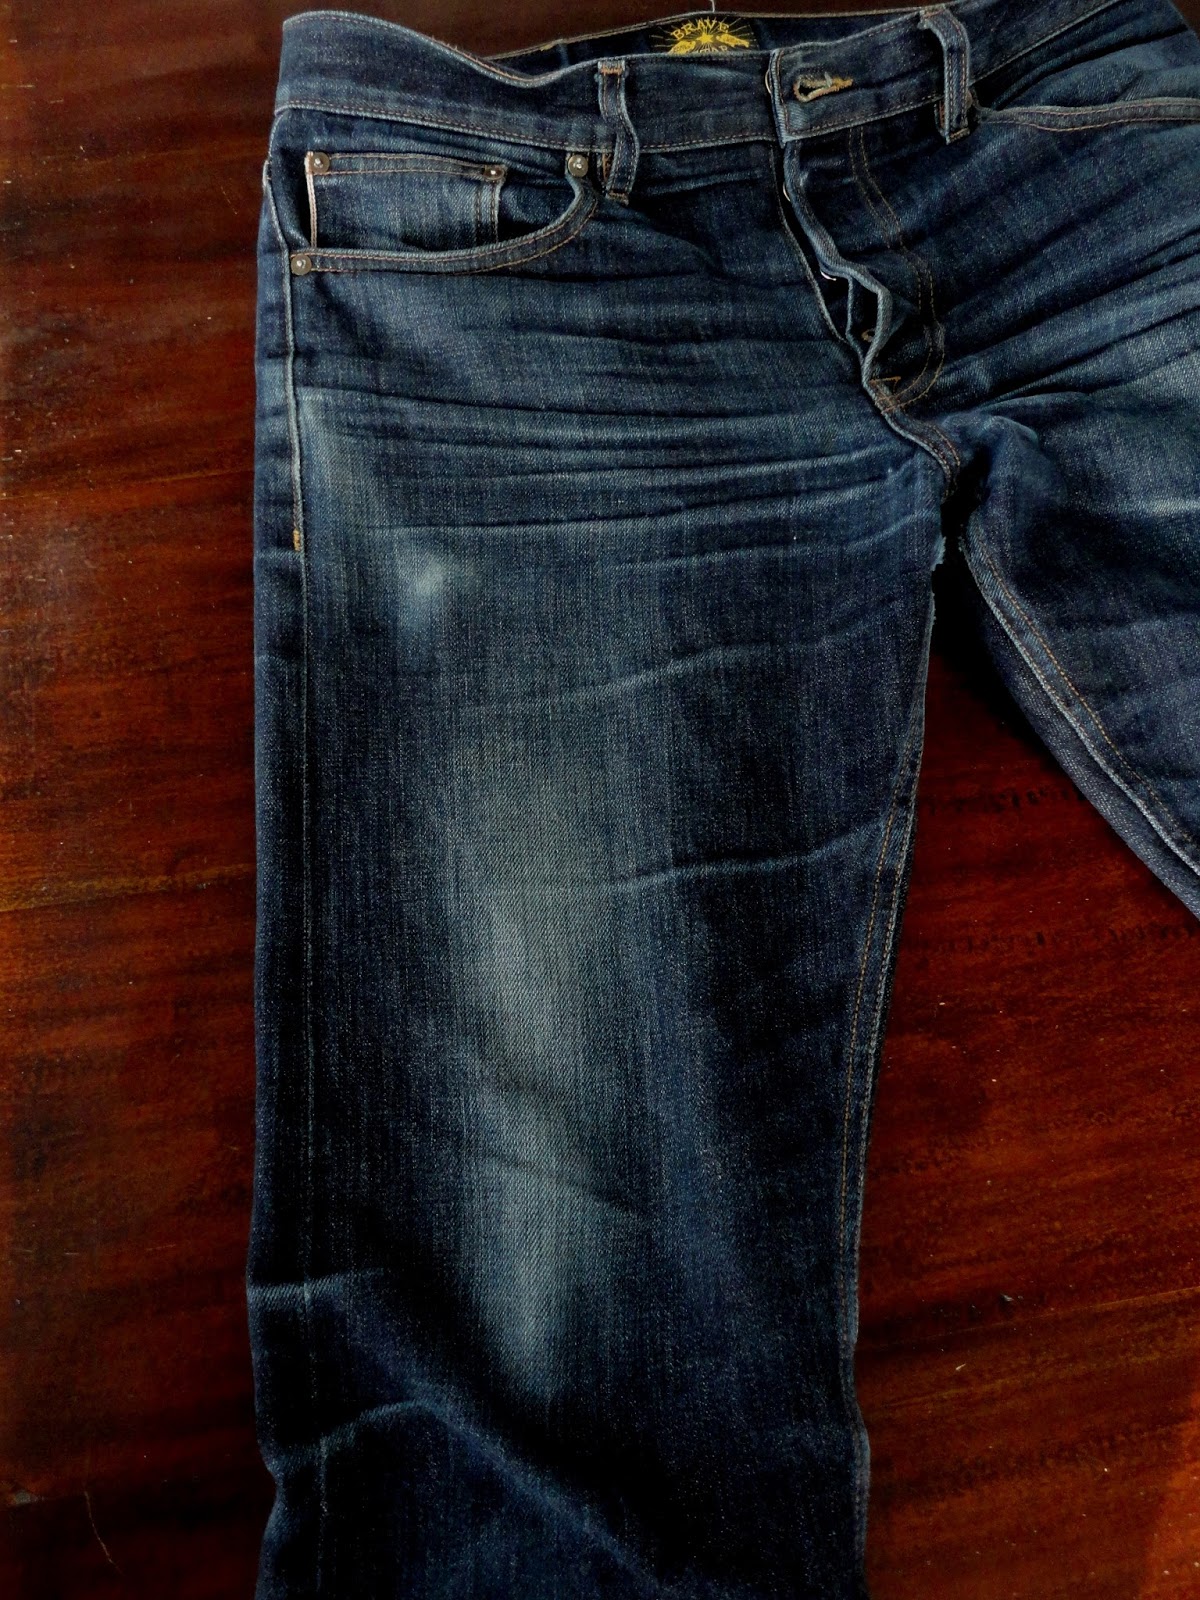 Landless Gentry: Denim Review: 15 oz. Cone mills Selvage by